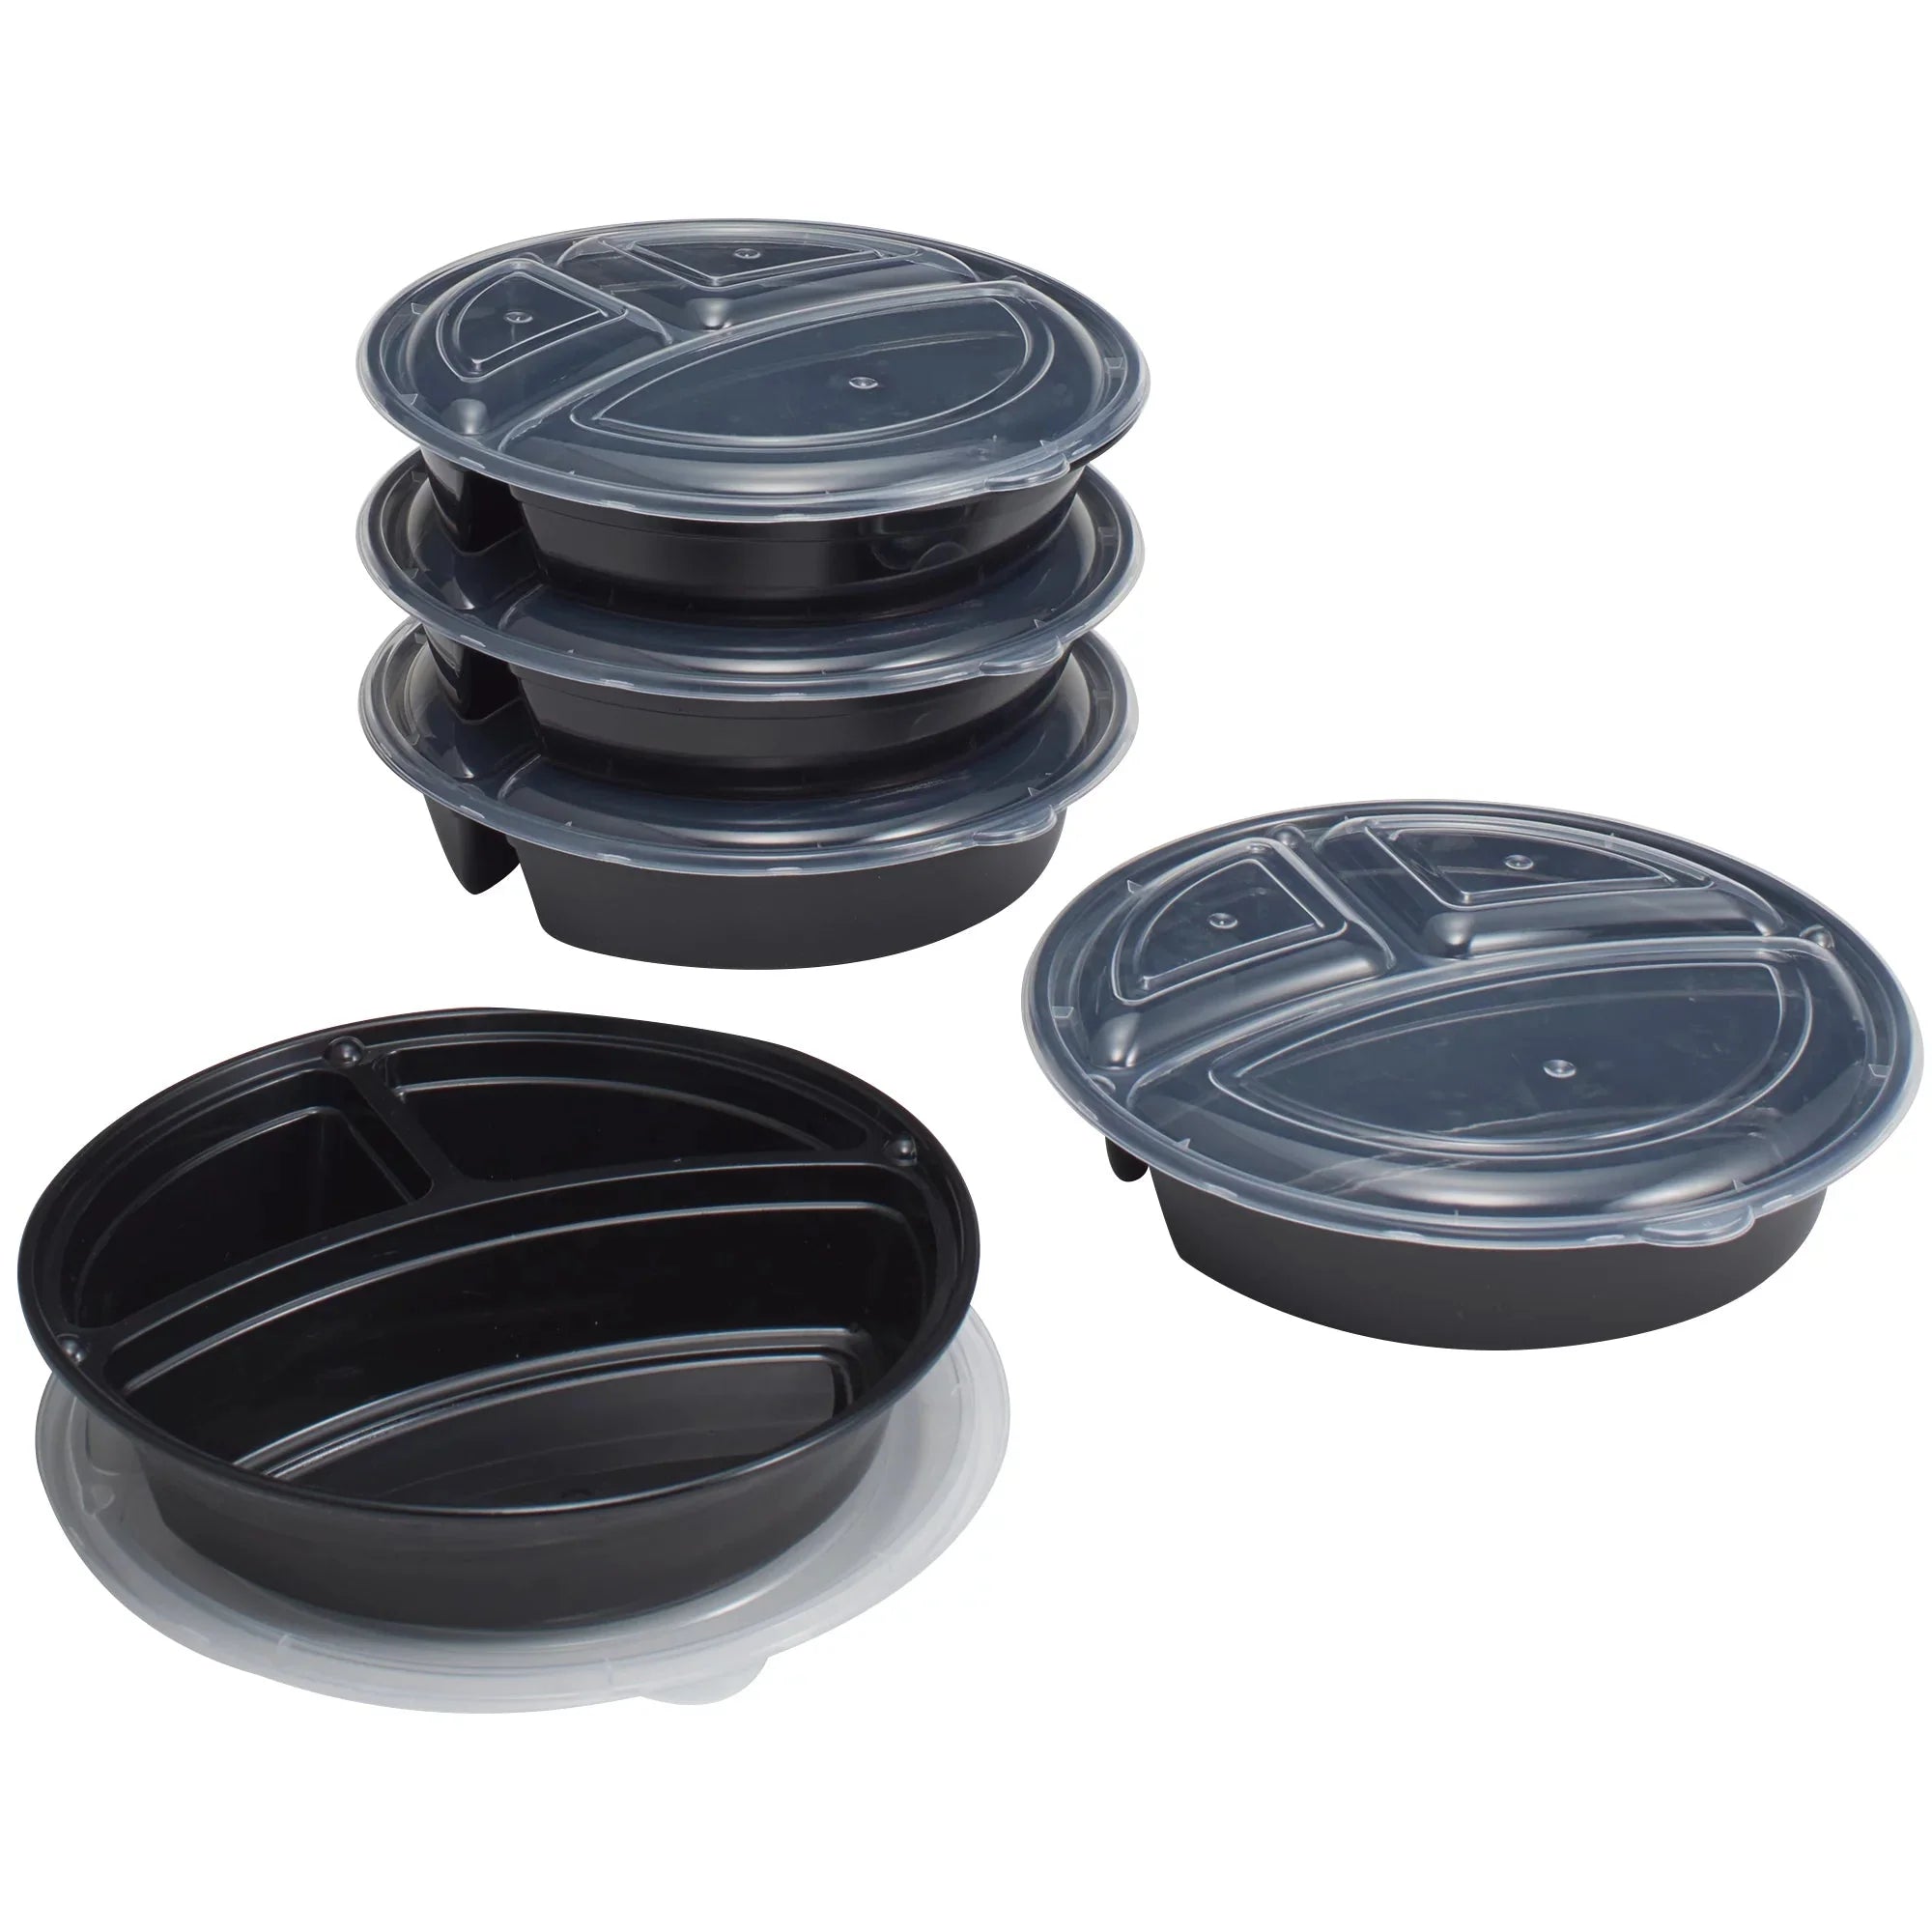 Wholesale prices with free shipping all over United States Mainstays 3-Compartment 1L Round Meal Prep Food Storage Container, 5 Pack - Steven Deals